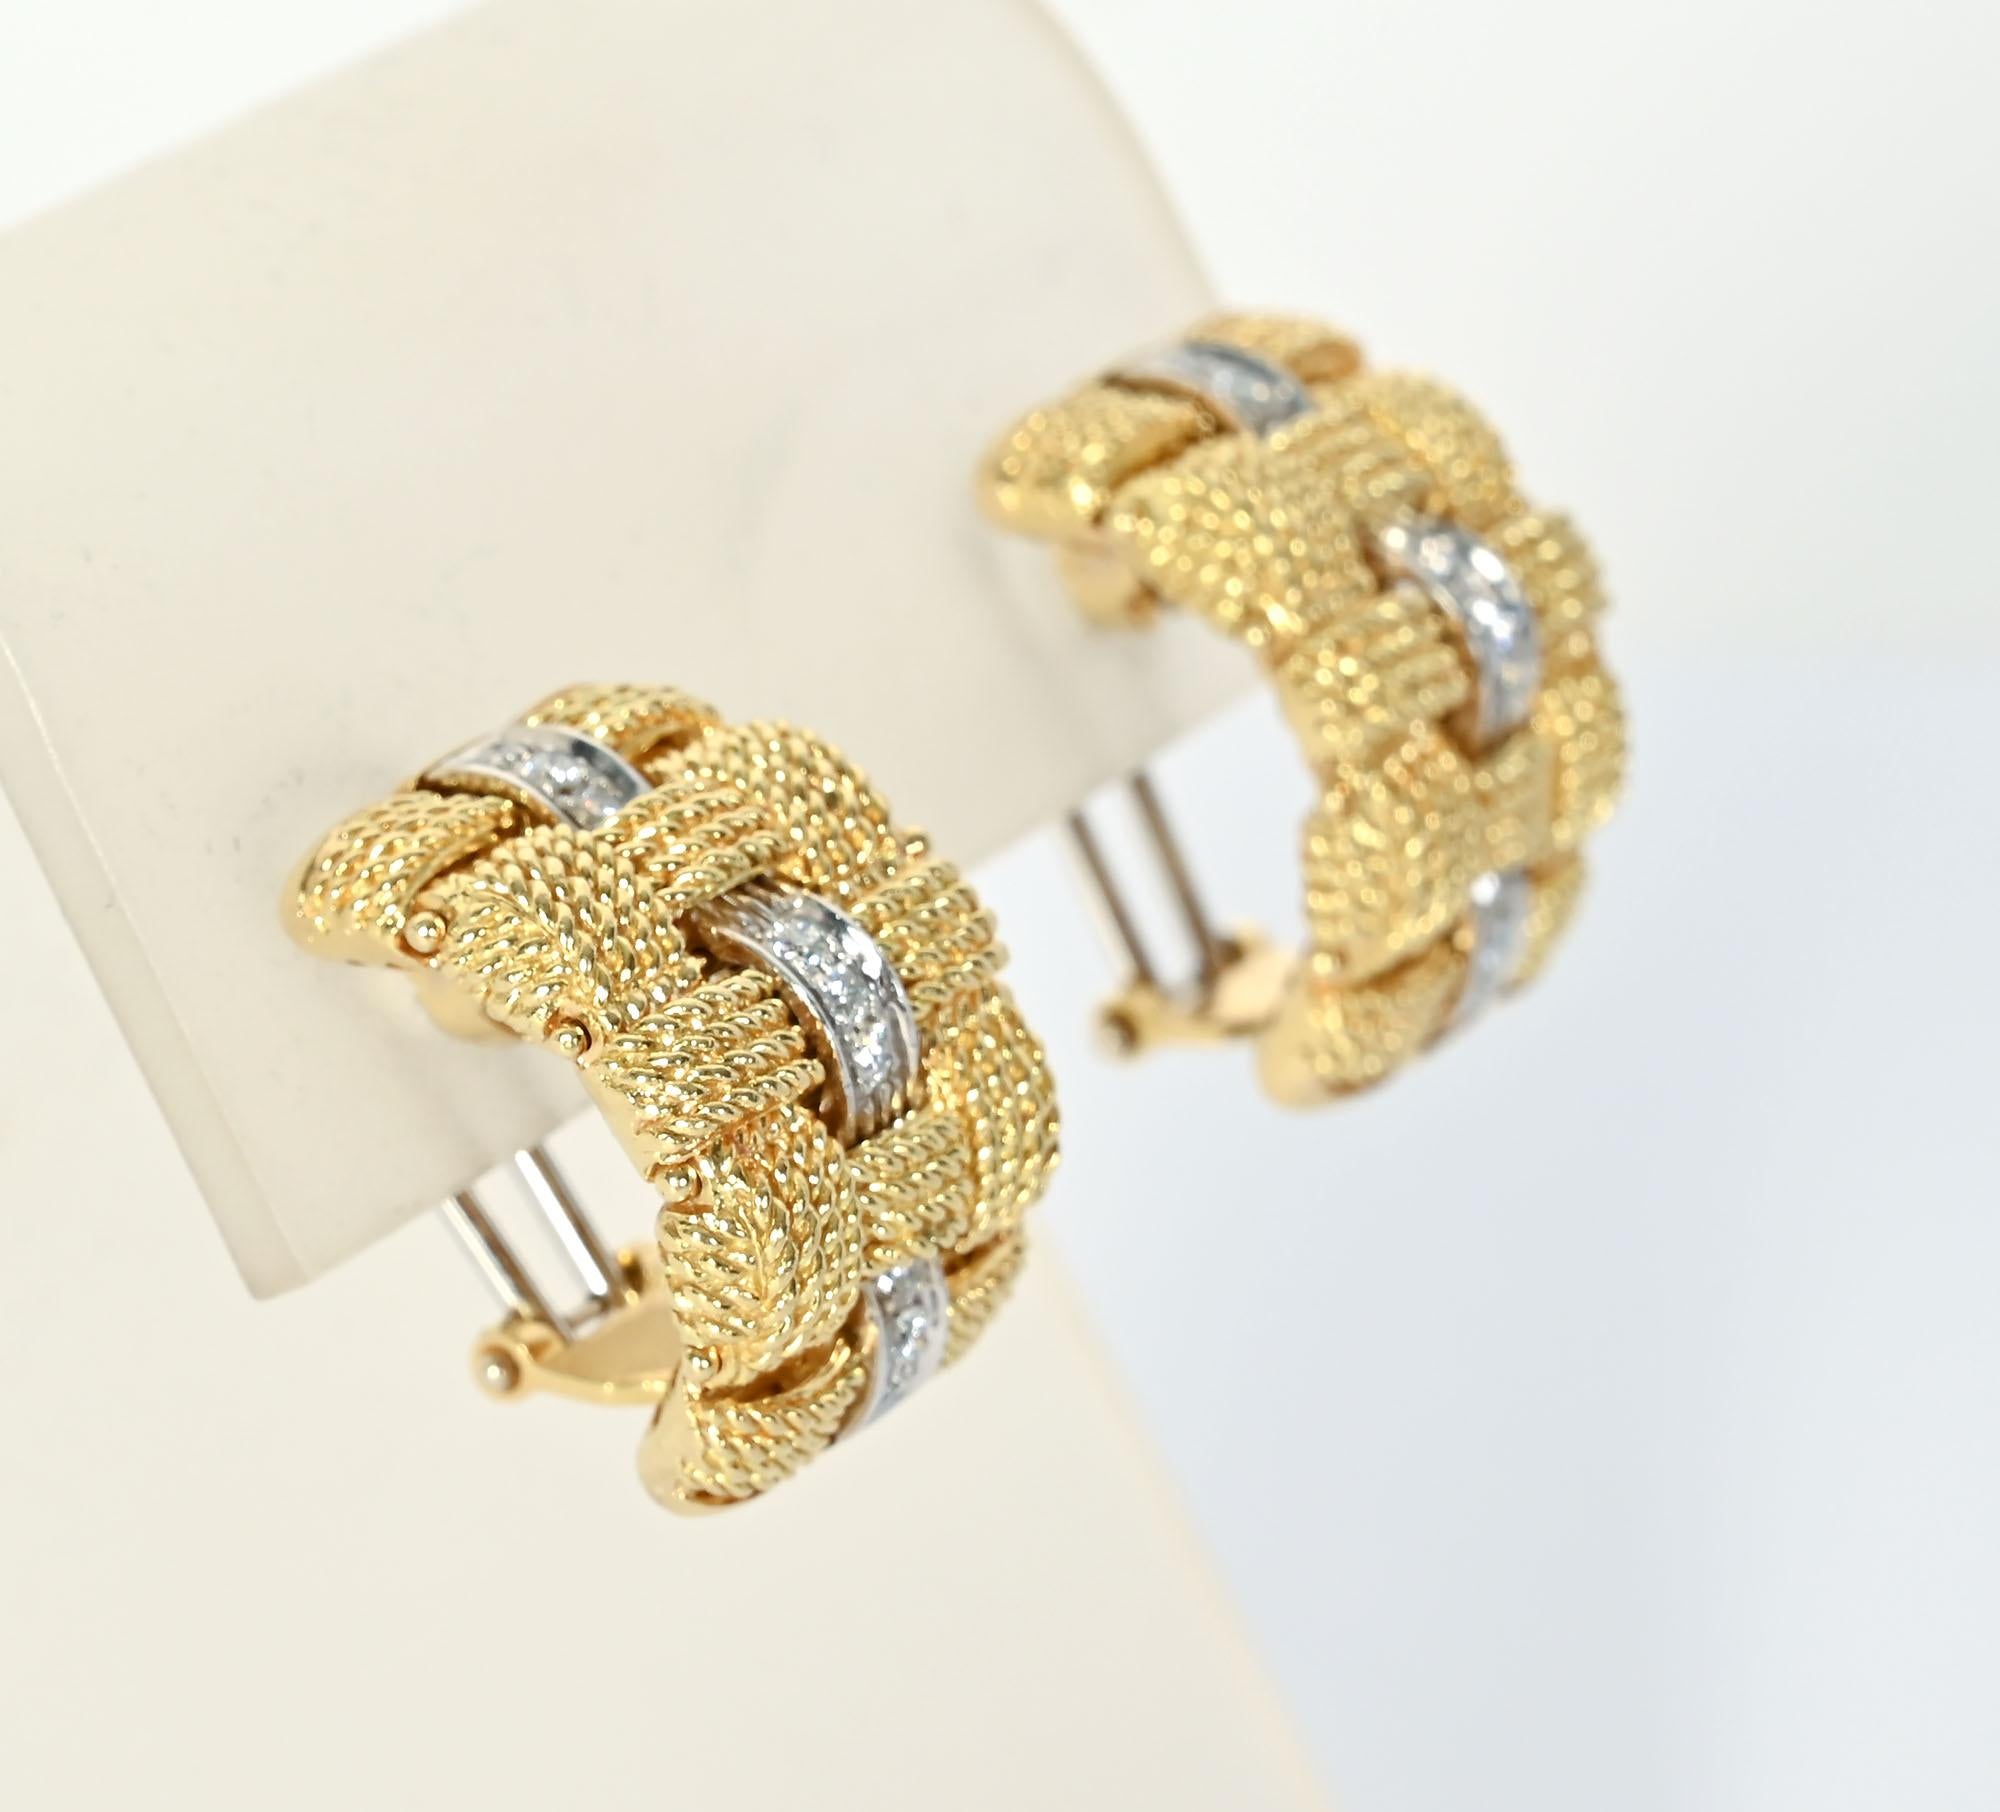 Elegant half hoop earrings in 18 karat gold with diamonds by Roberto Coin in his famous Appassionata pattern. Four rows of finely twisted gold are set at right angles  Set between them are three groups of three diamonds each set in white gold. The